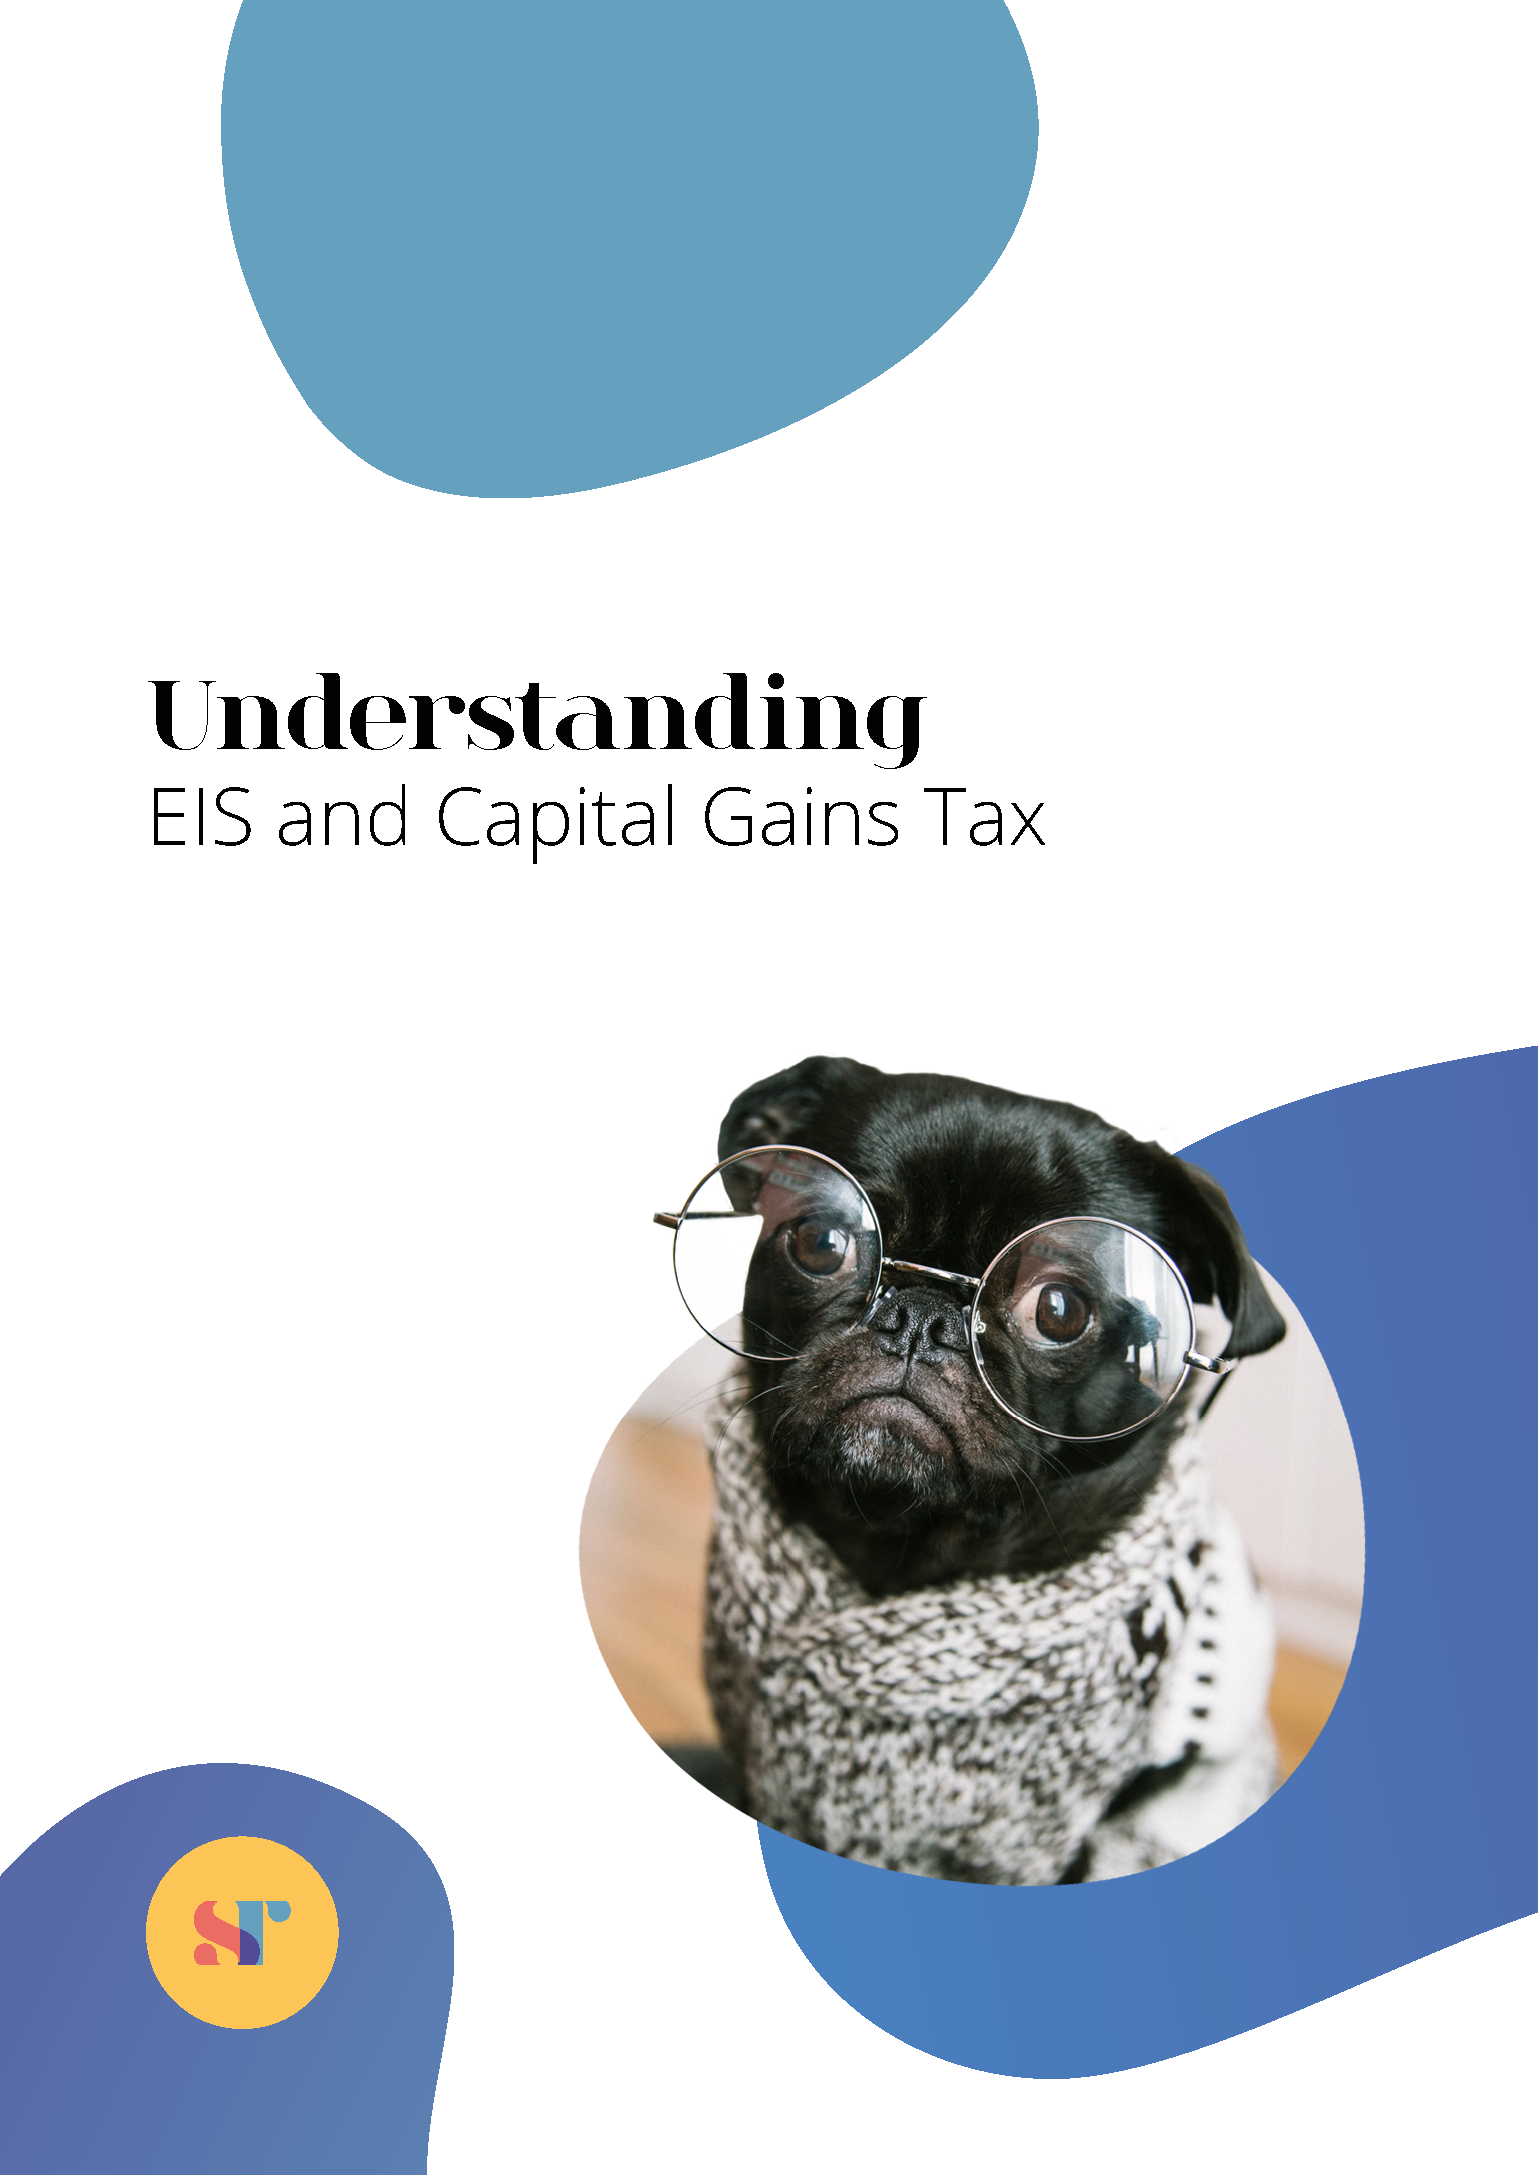 explore-tax-efficient-investment-opportunities-and-cgt-deferral-examples